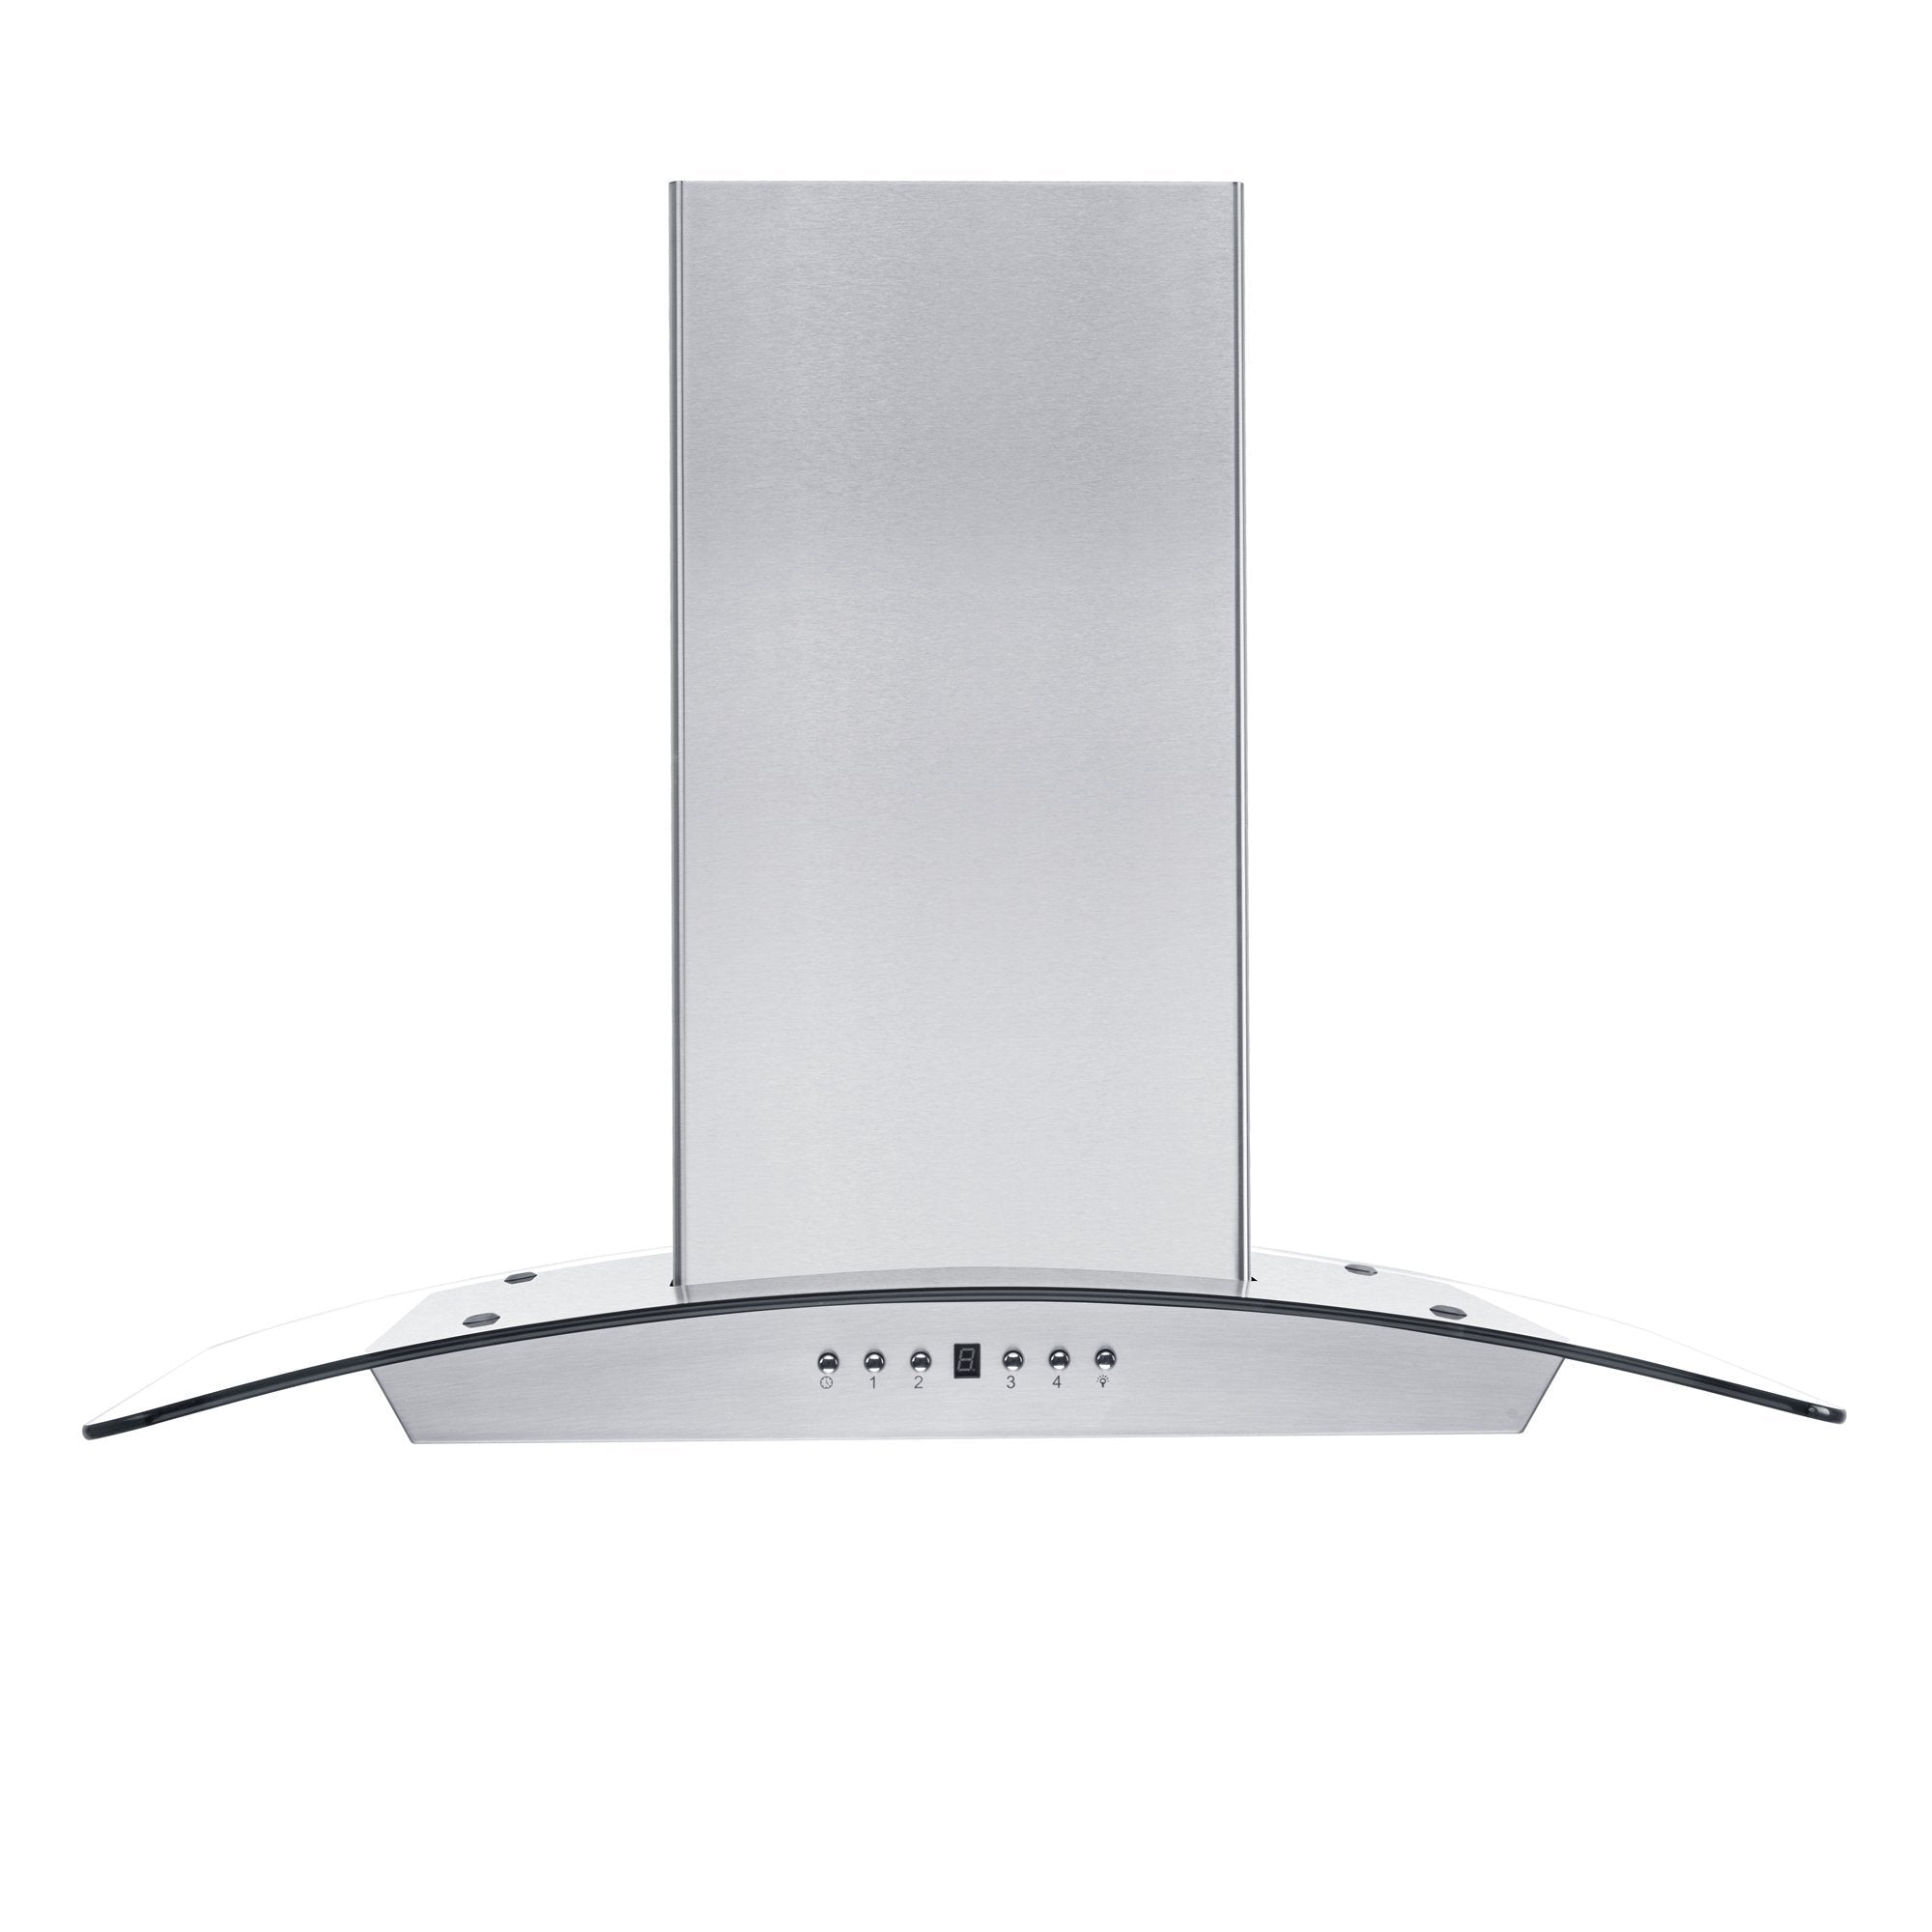 ZLINE Convertible Vent Wall Mount Range Hood in Stainless Steel & Glass with Crown Molding (KZCRN) front.